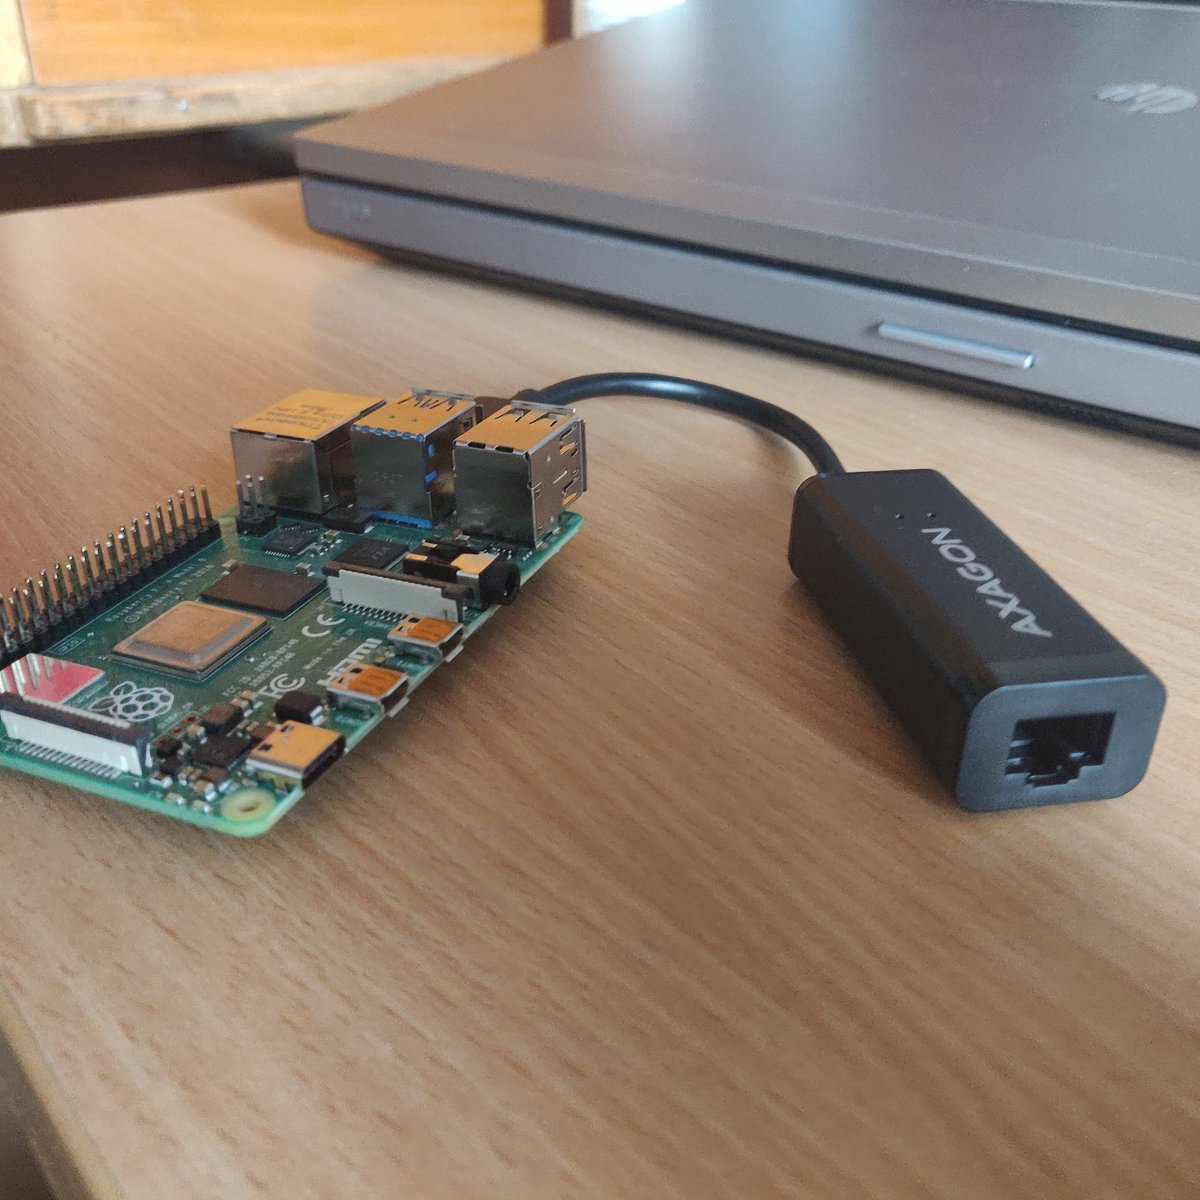 Raspberry Pi 4 is powerful enough to be my new home router. It's finally capable to saturate full gigabit link, it has plethora of RAM, and its four ARM cores will be perfect to boost my VPN performance. OpenWrt just recently added support for it. #raspberrypi  #router  #openwrt